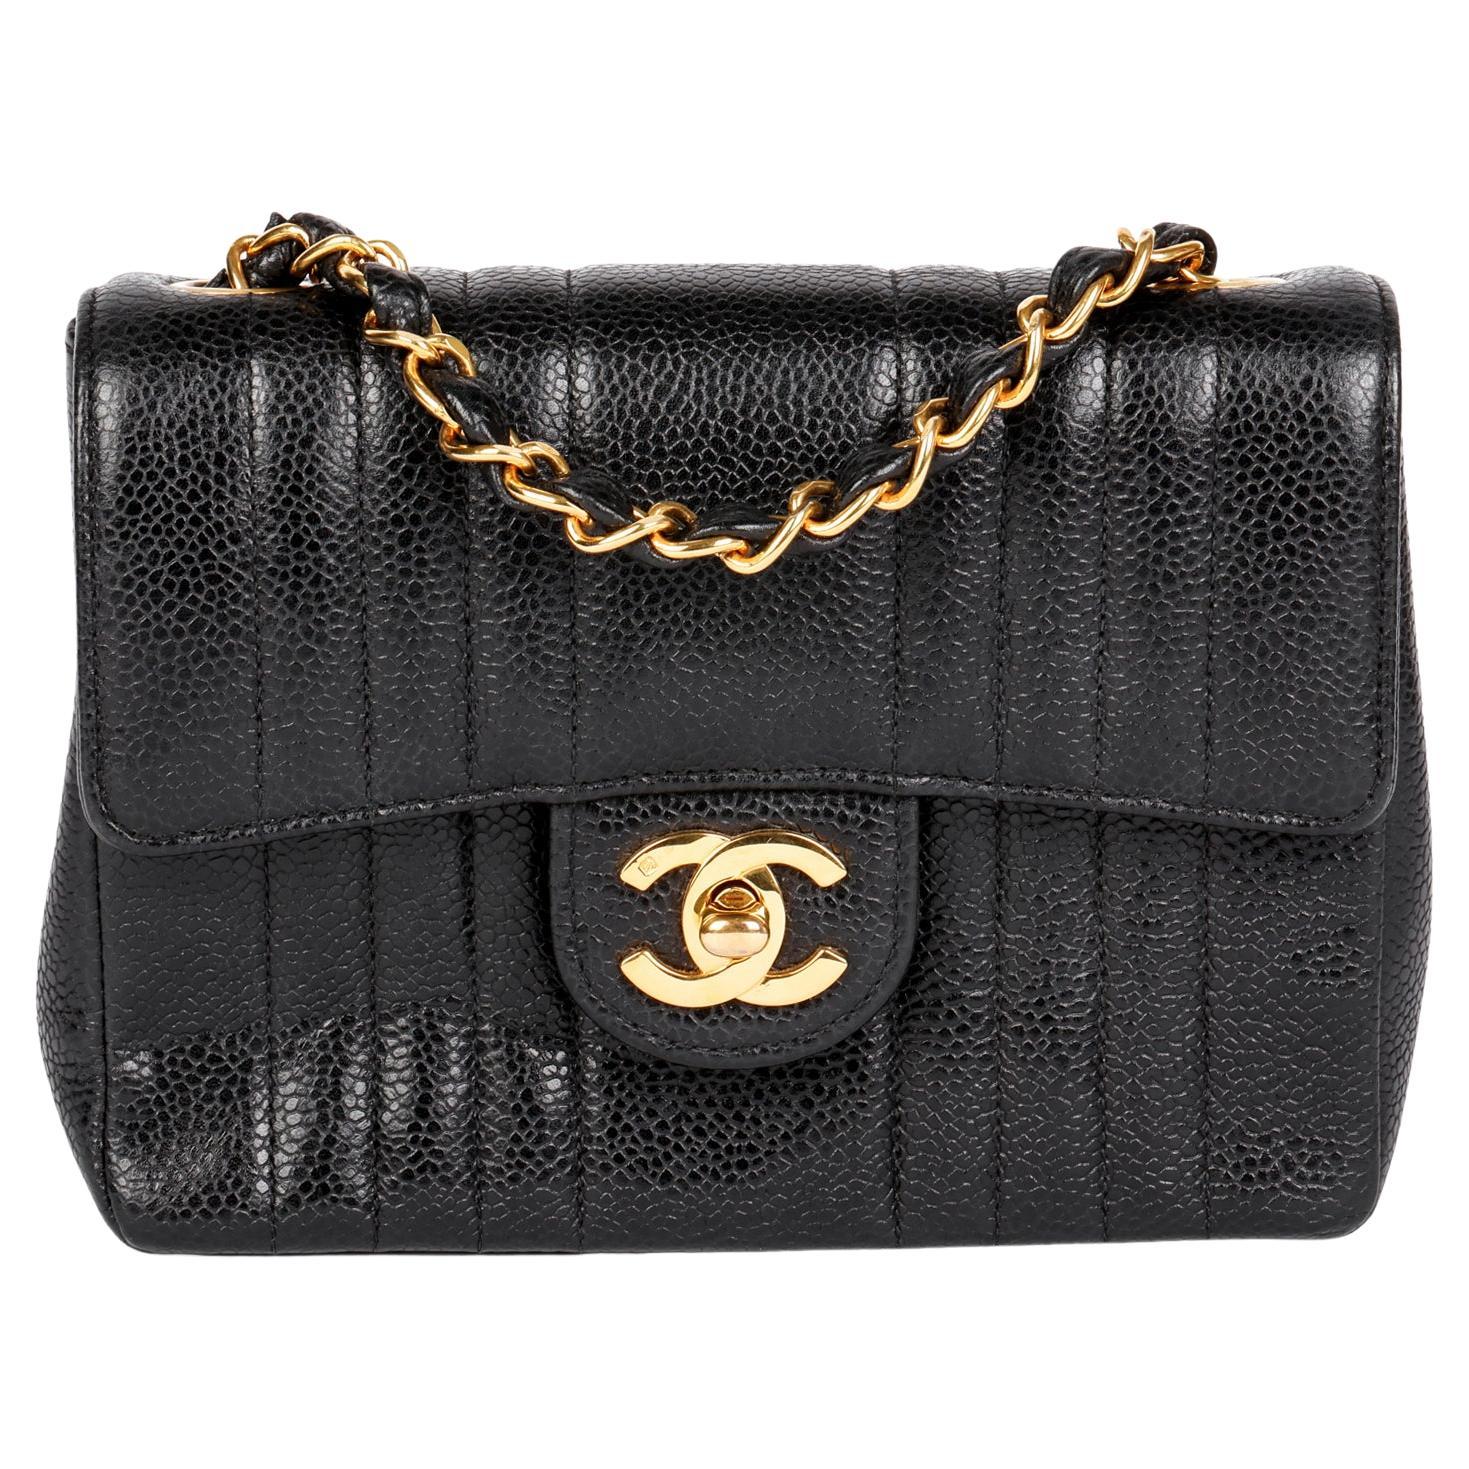 CHANEL Black Vertical Quilted Caviar Leather Vintage Square Mini Flap Bag